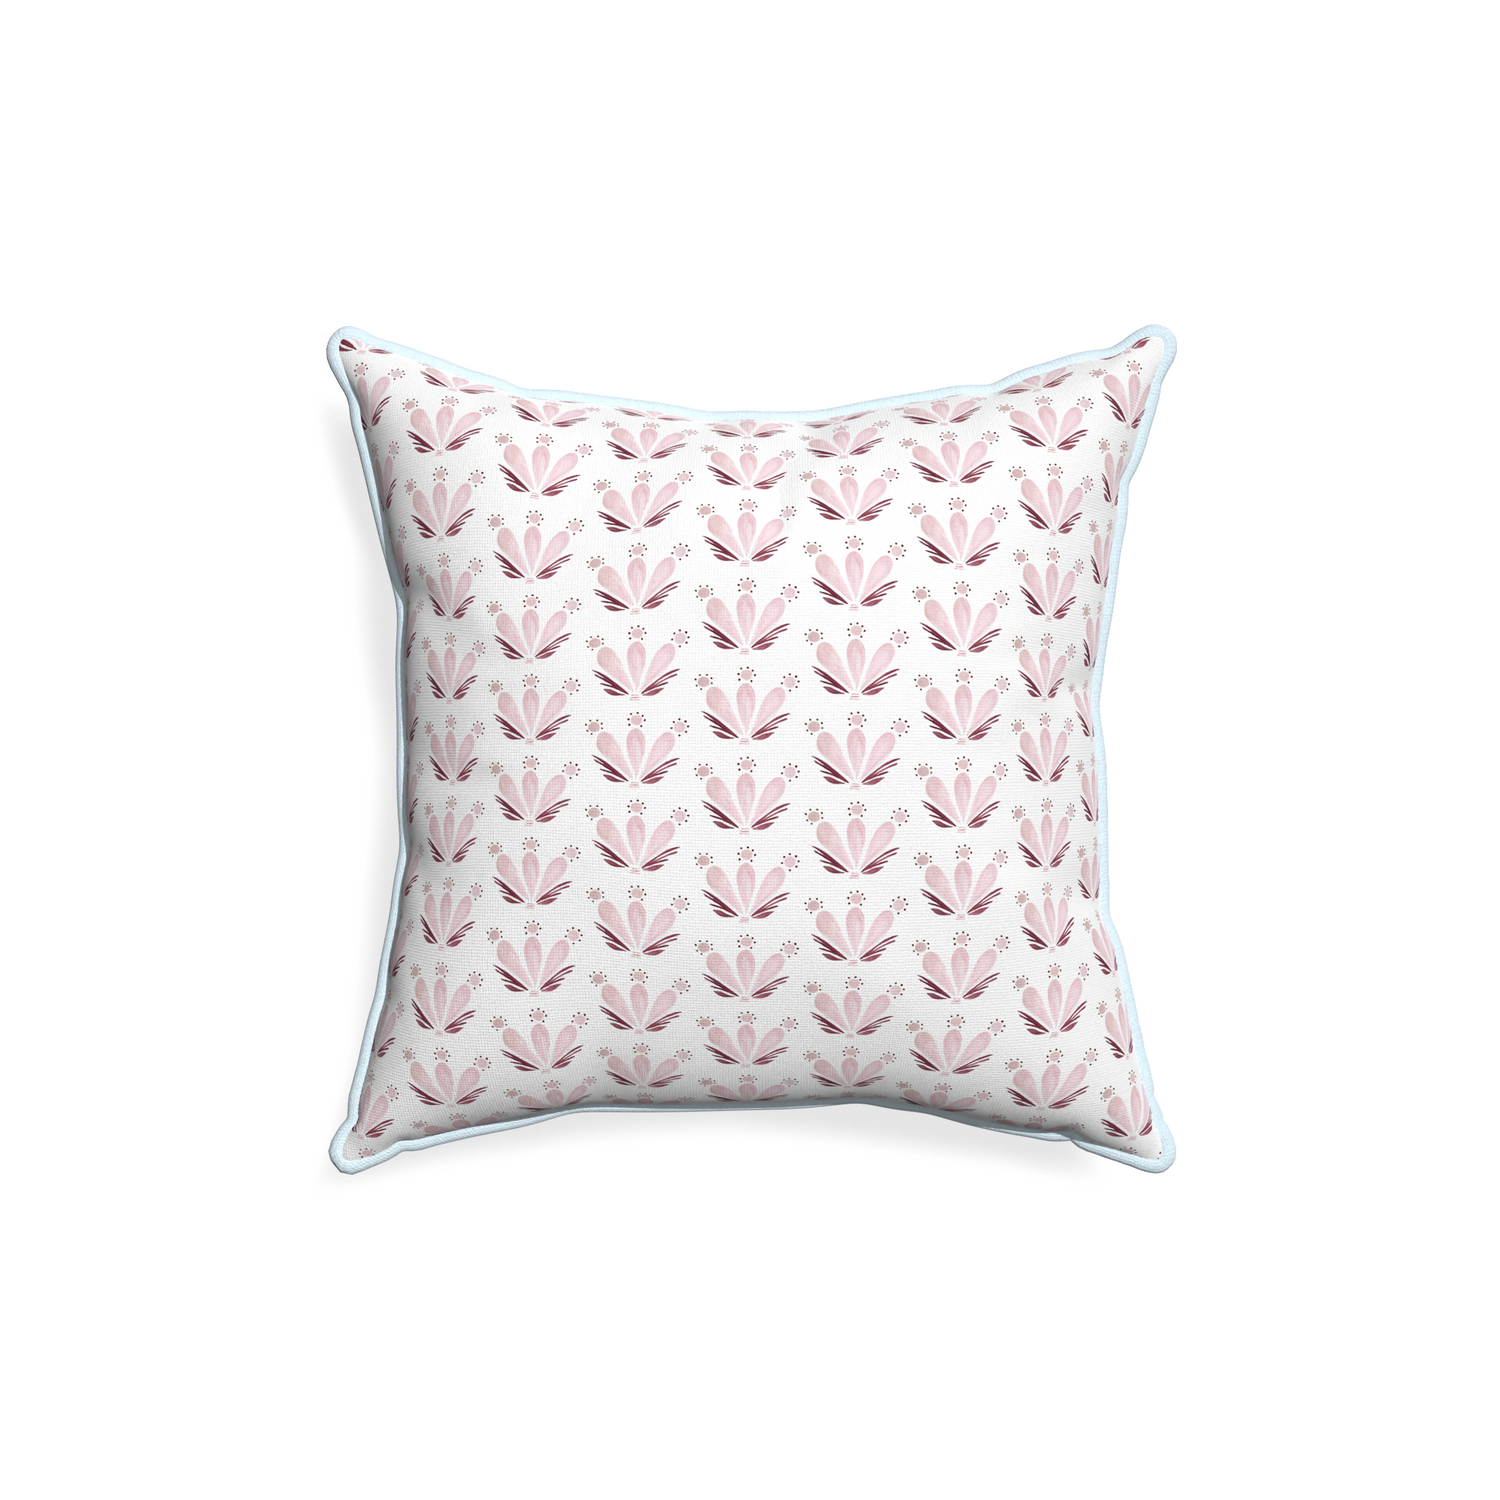 18-square serena pink custom pillow with powder piping on white background